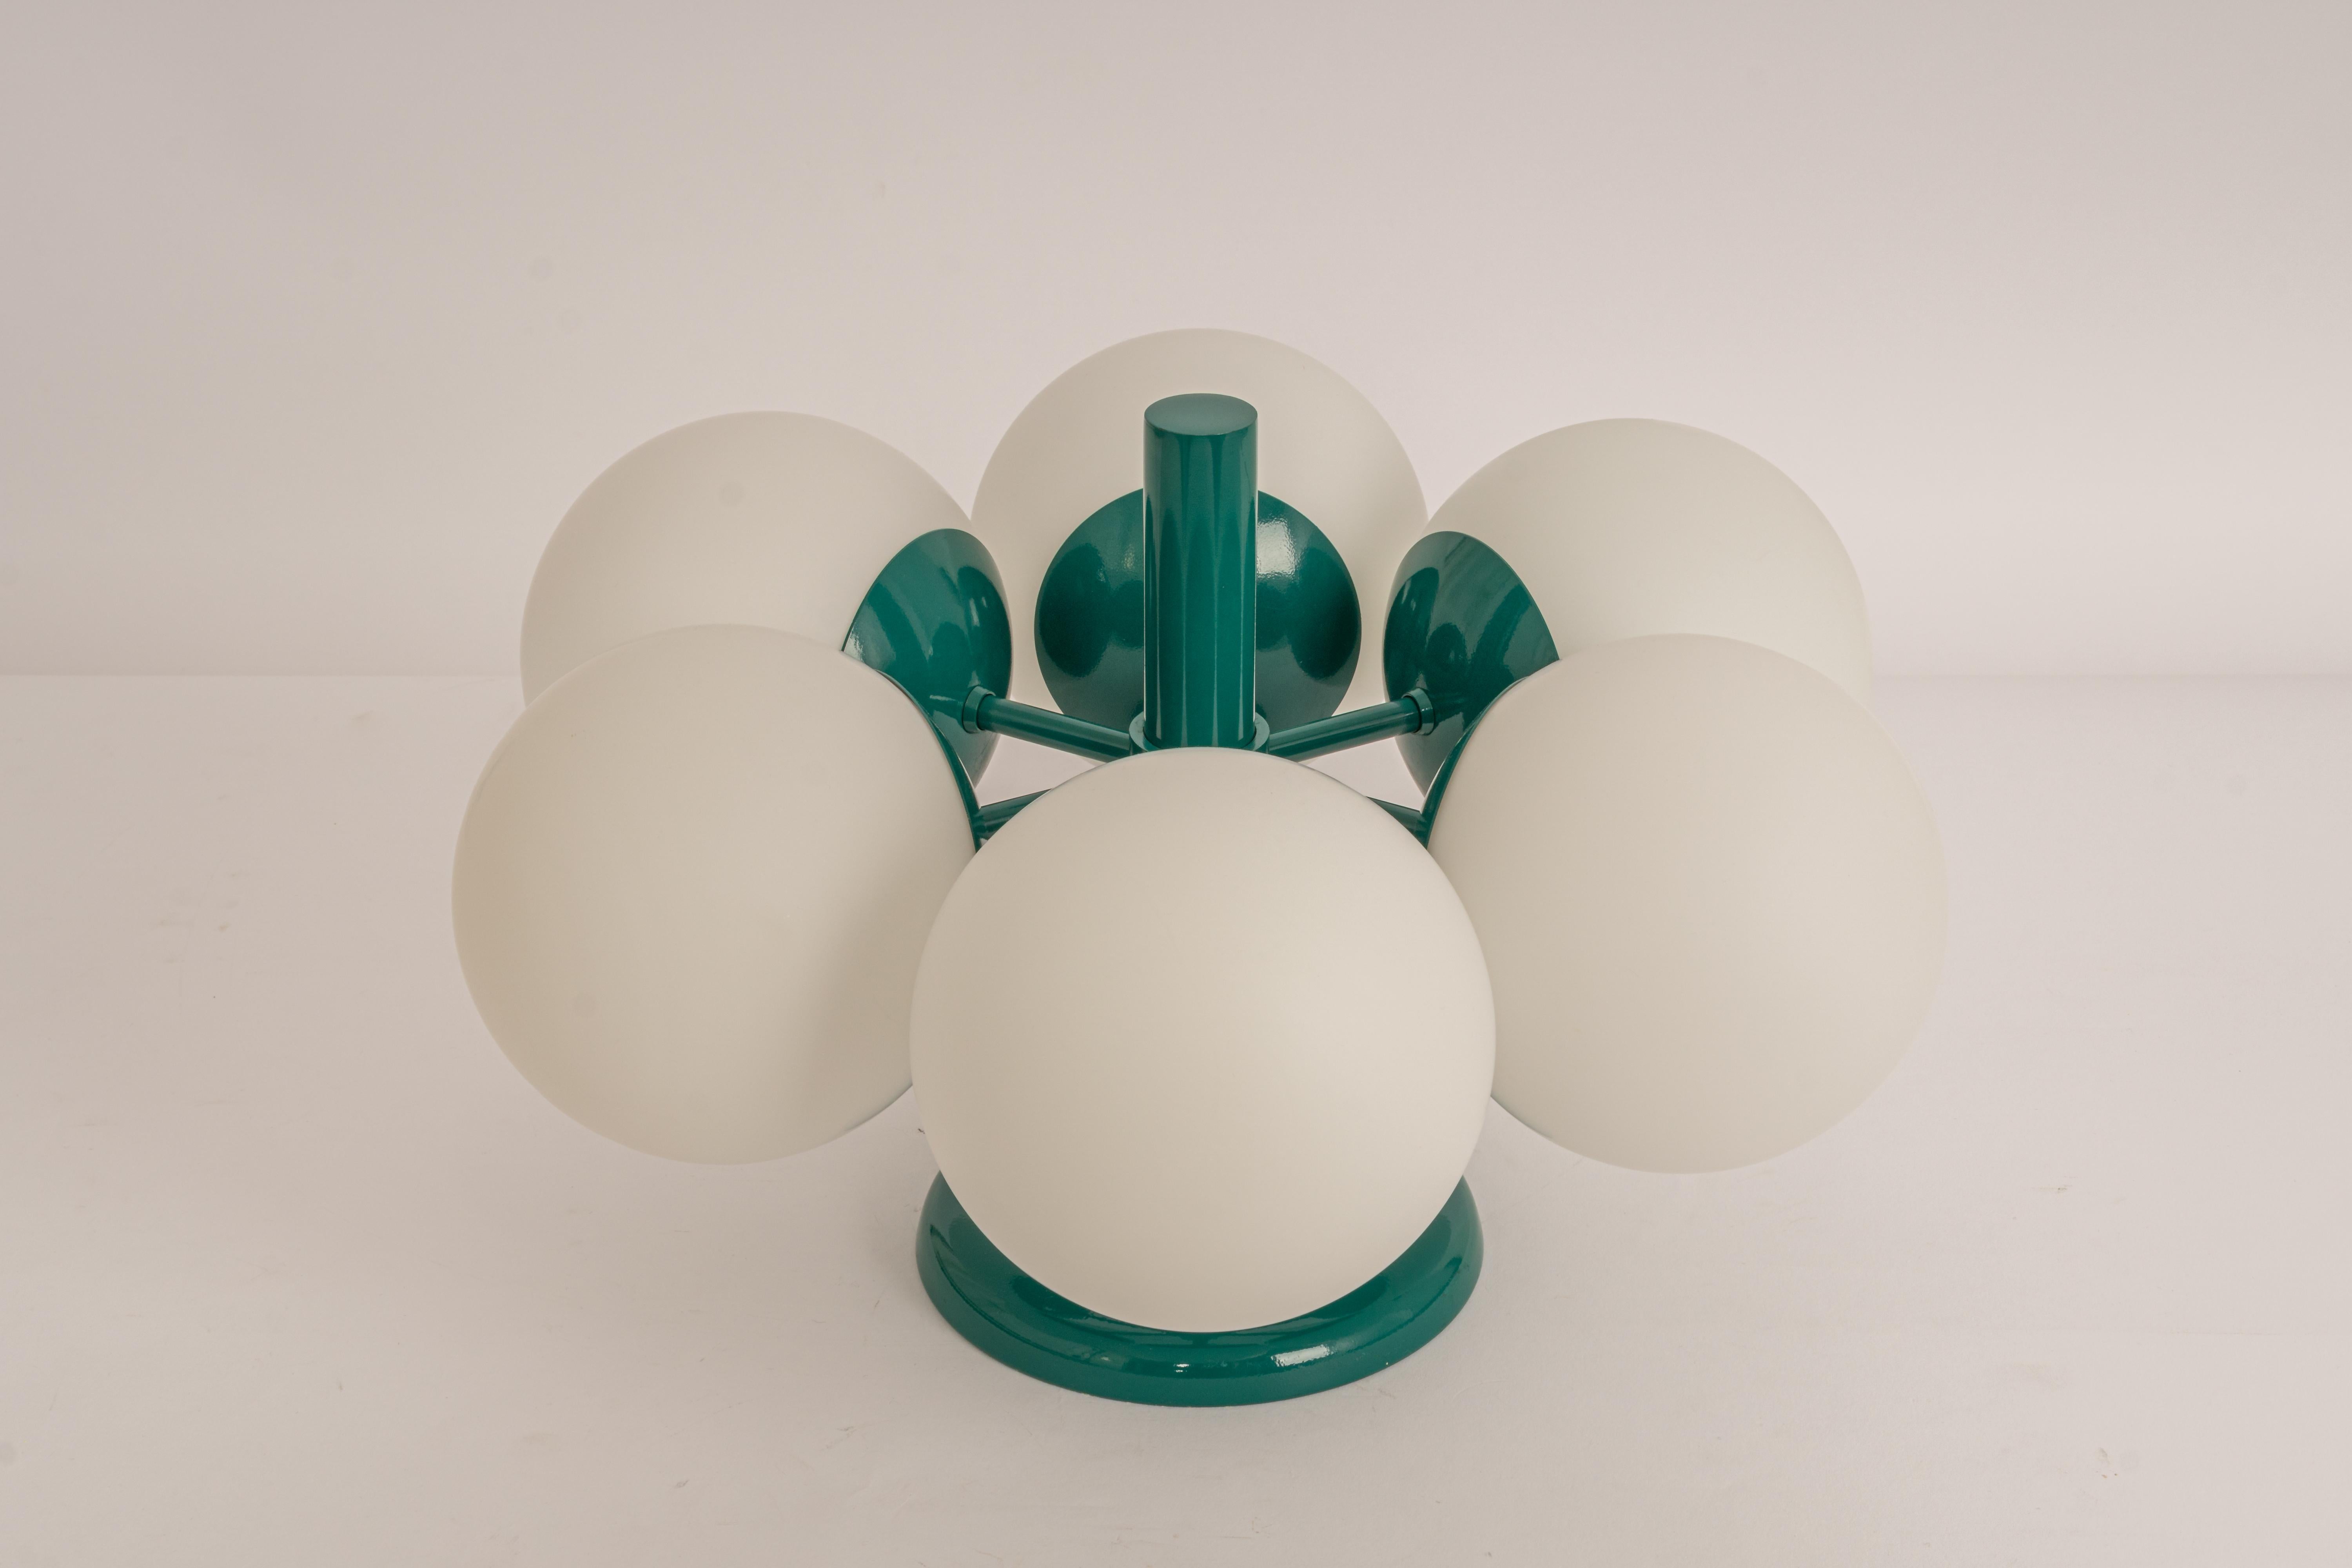 Midcentury vintage ceiling or wall light in green color made by Kaiser Leuchten, Germany with 6 opal glass balls.
High quality and in very good condition. Cleaned, well-wired, and ready to use. 

The fixture requires 6 x E14 small bulbs with 40W